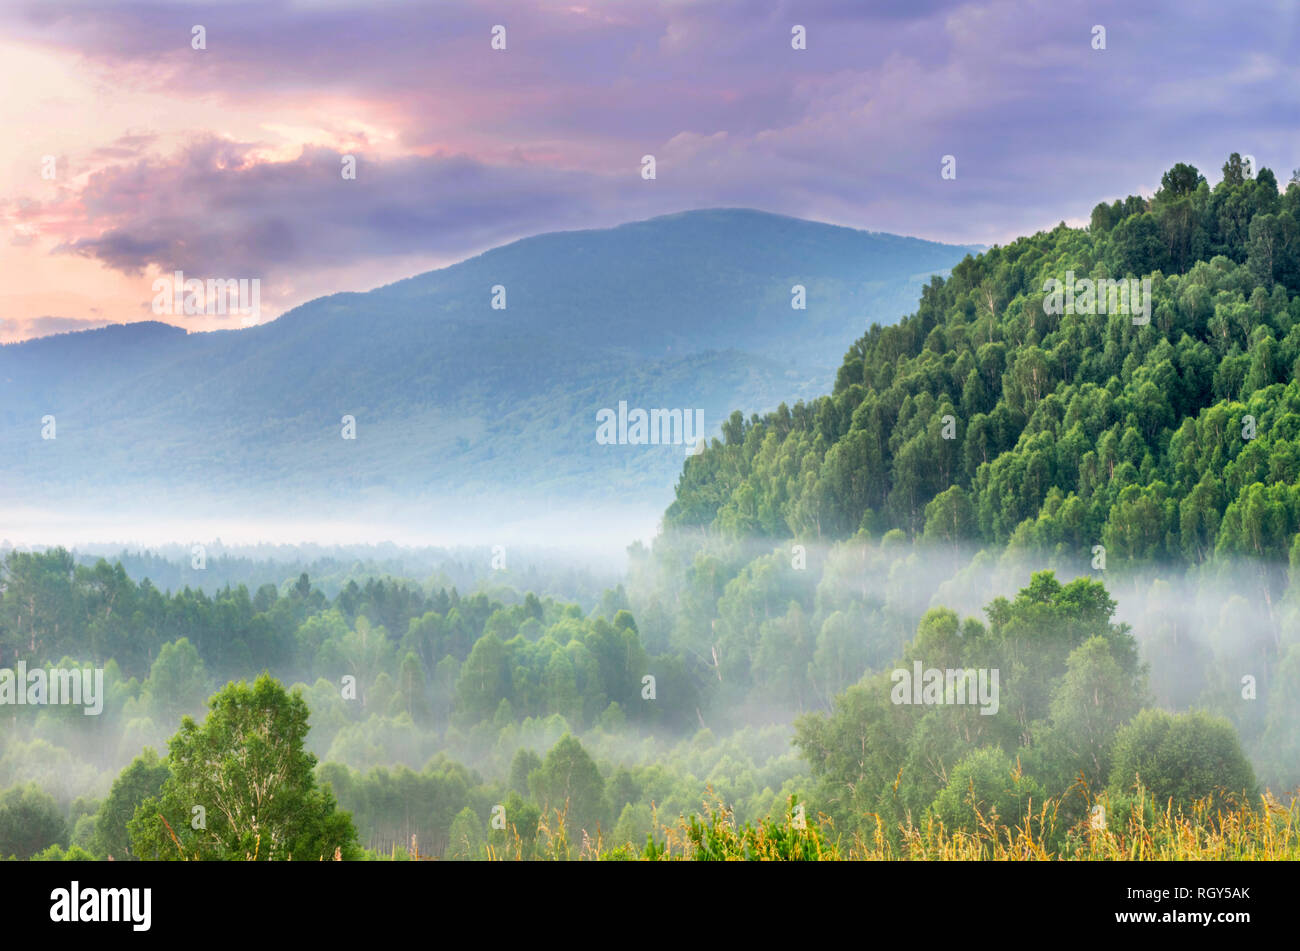 Dramatic Sunrise in the Mountains with Thick Misty Evergreen Forest on a Summer Morning, Ivanovskiy Khrebet Ridge, Altai Mountains, Kazakhstan.  Fanta Stock Photo